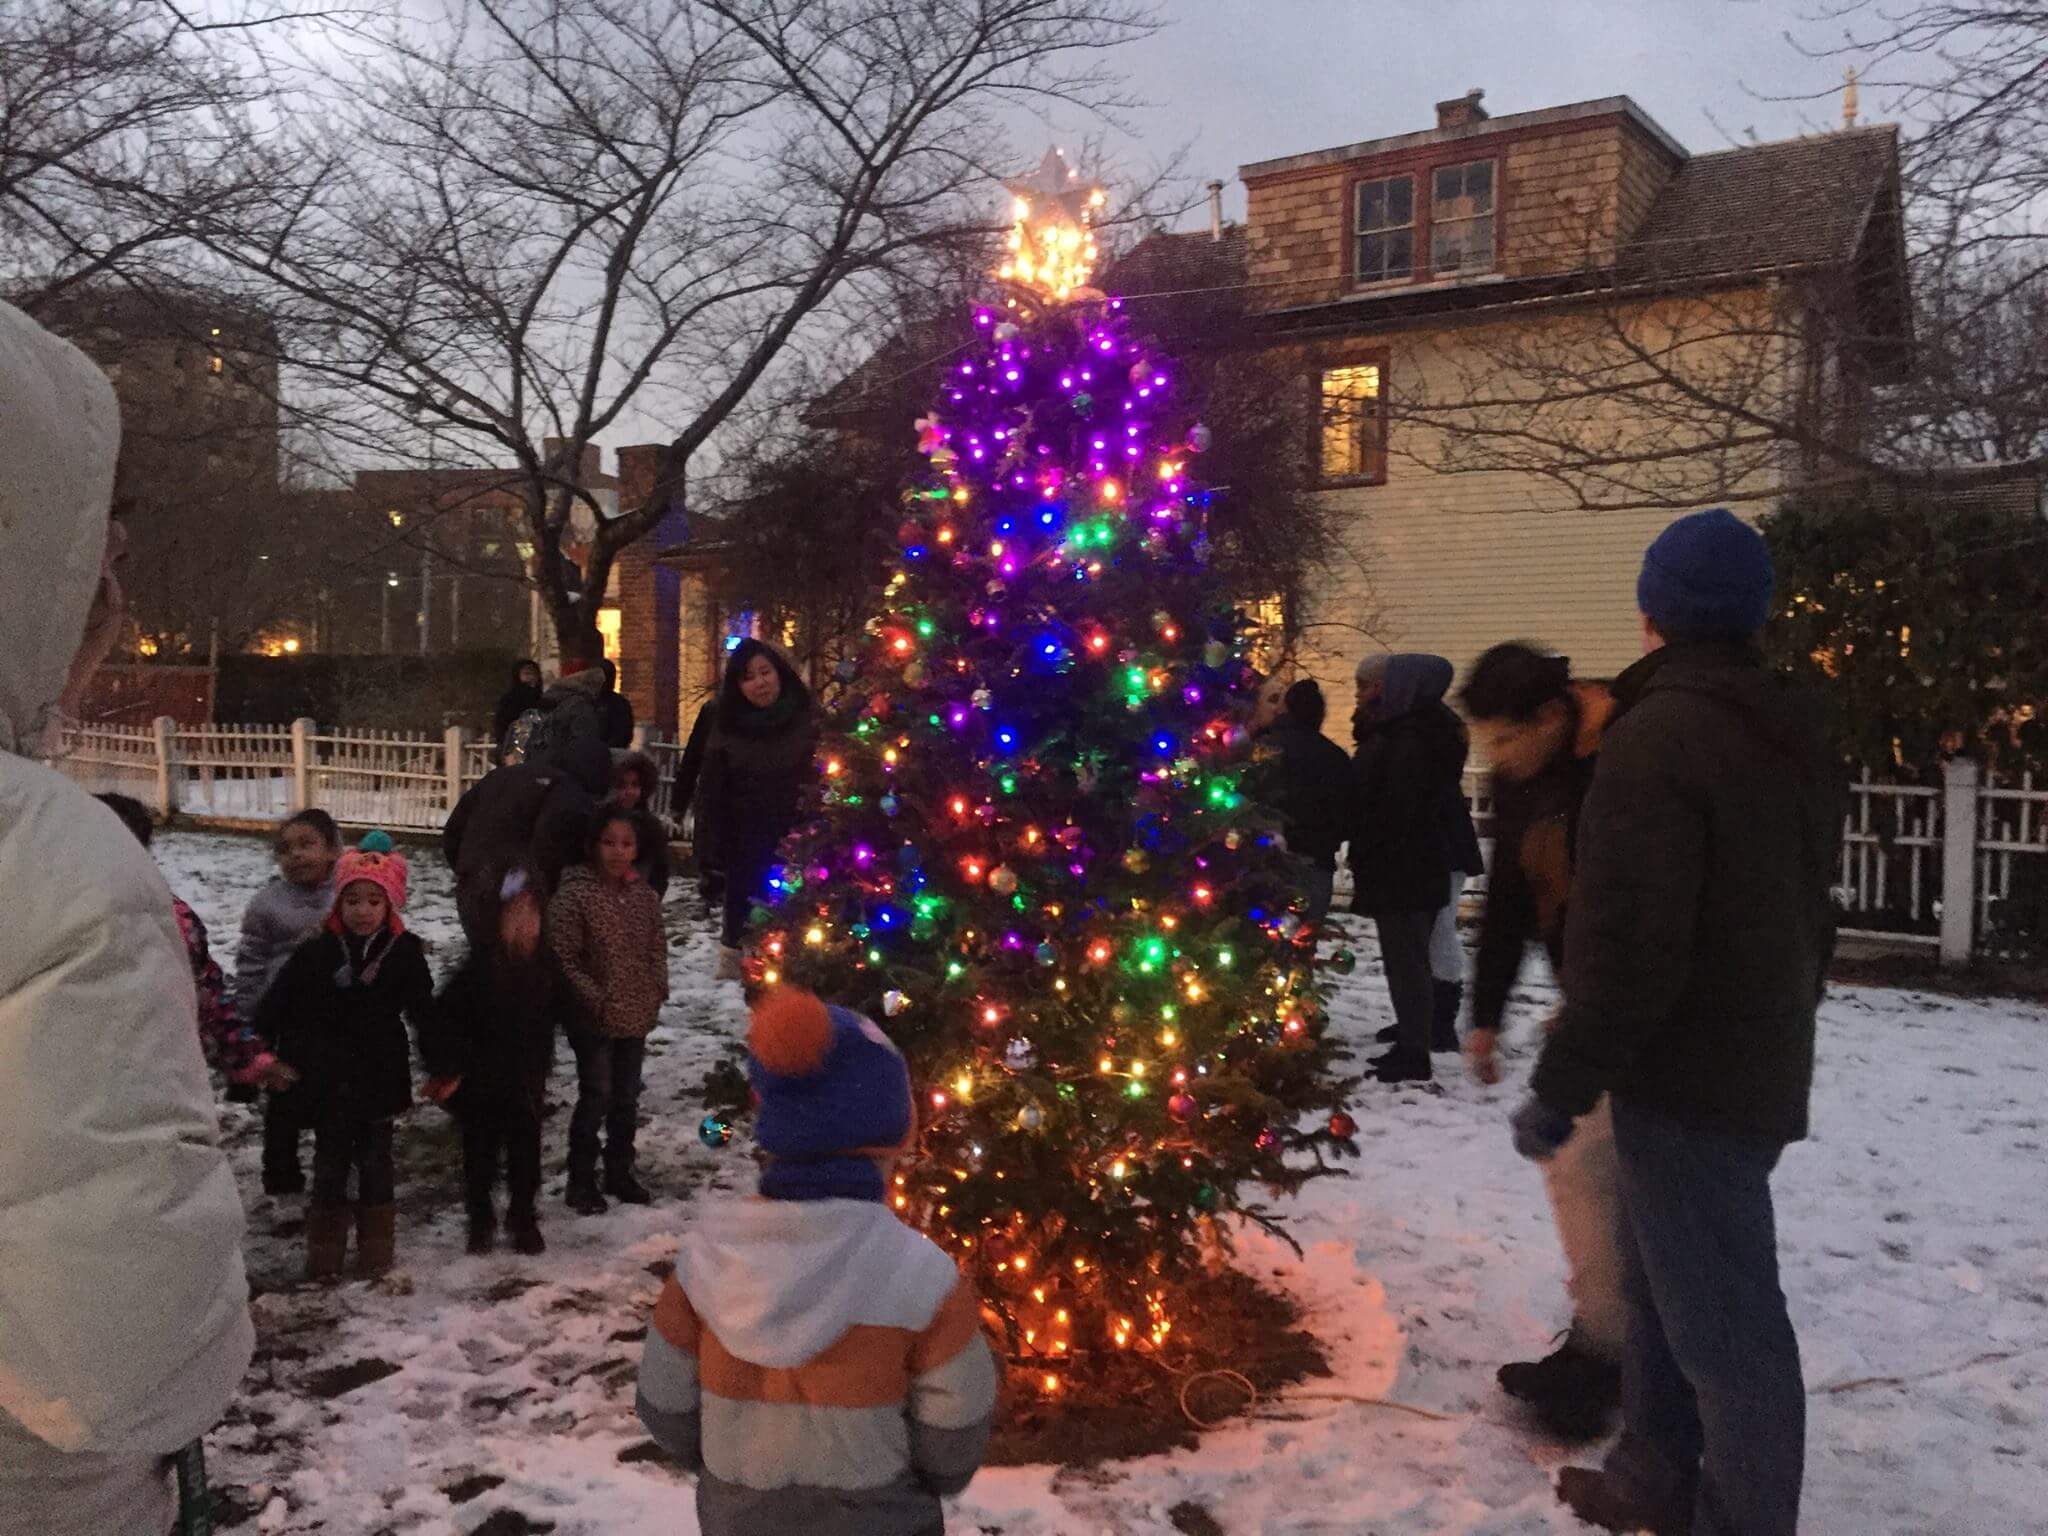 Holiday Tinker Festival and Tree Lighting - Flushing, Queens